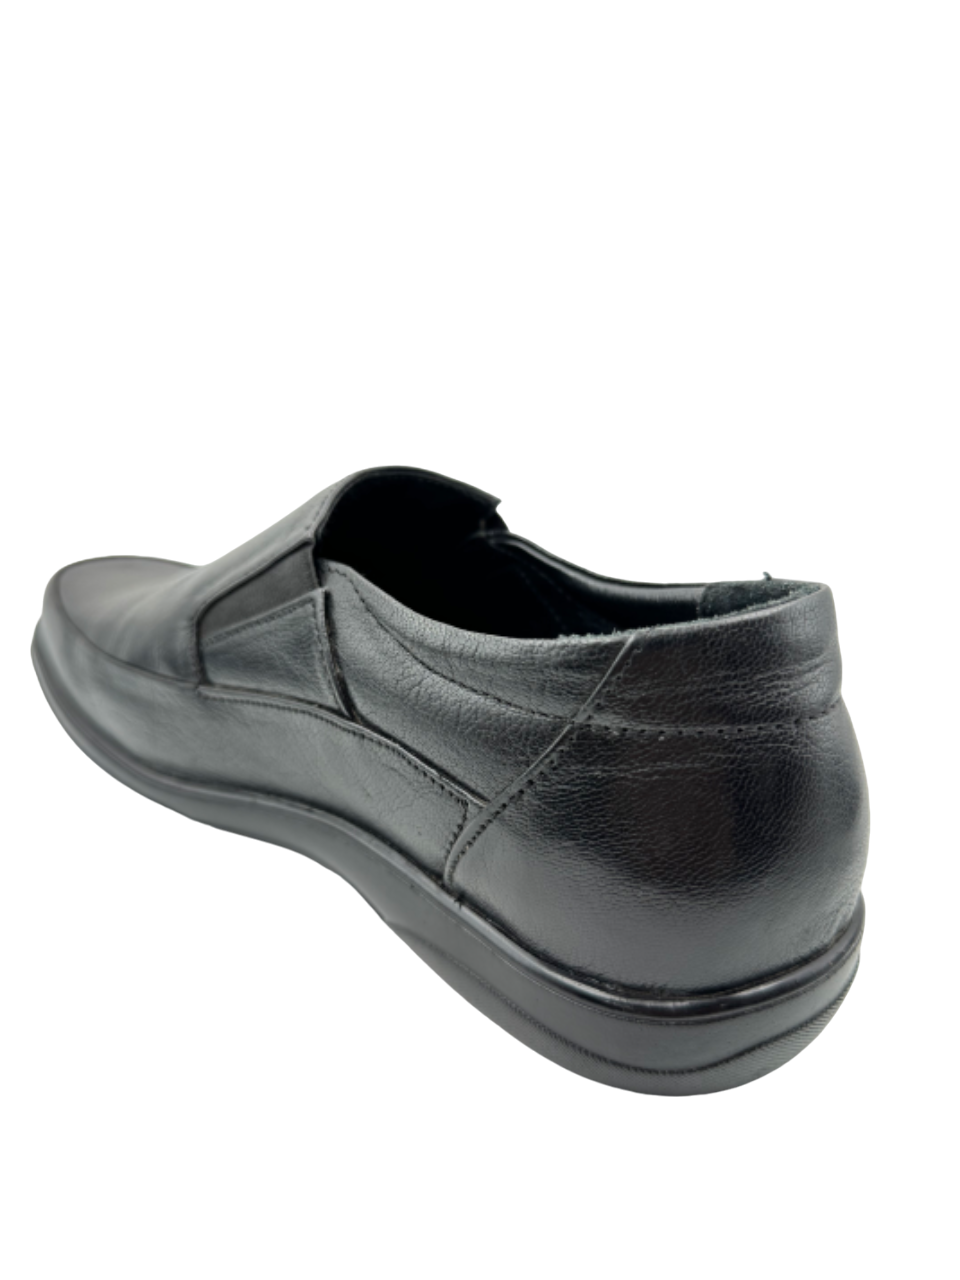 Ortho Soft Doctor Shoes GTSS 06